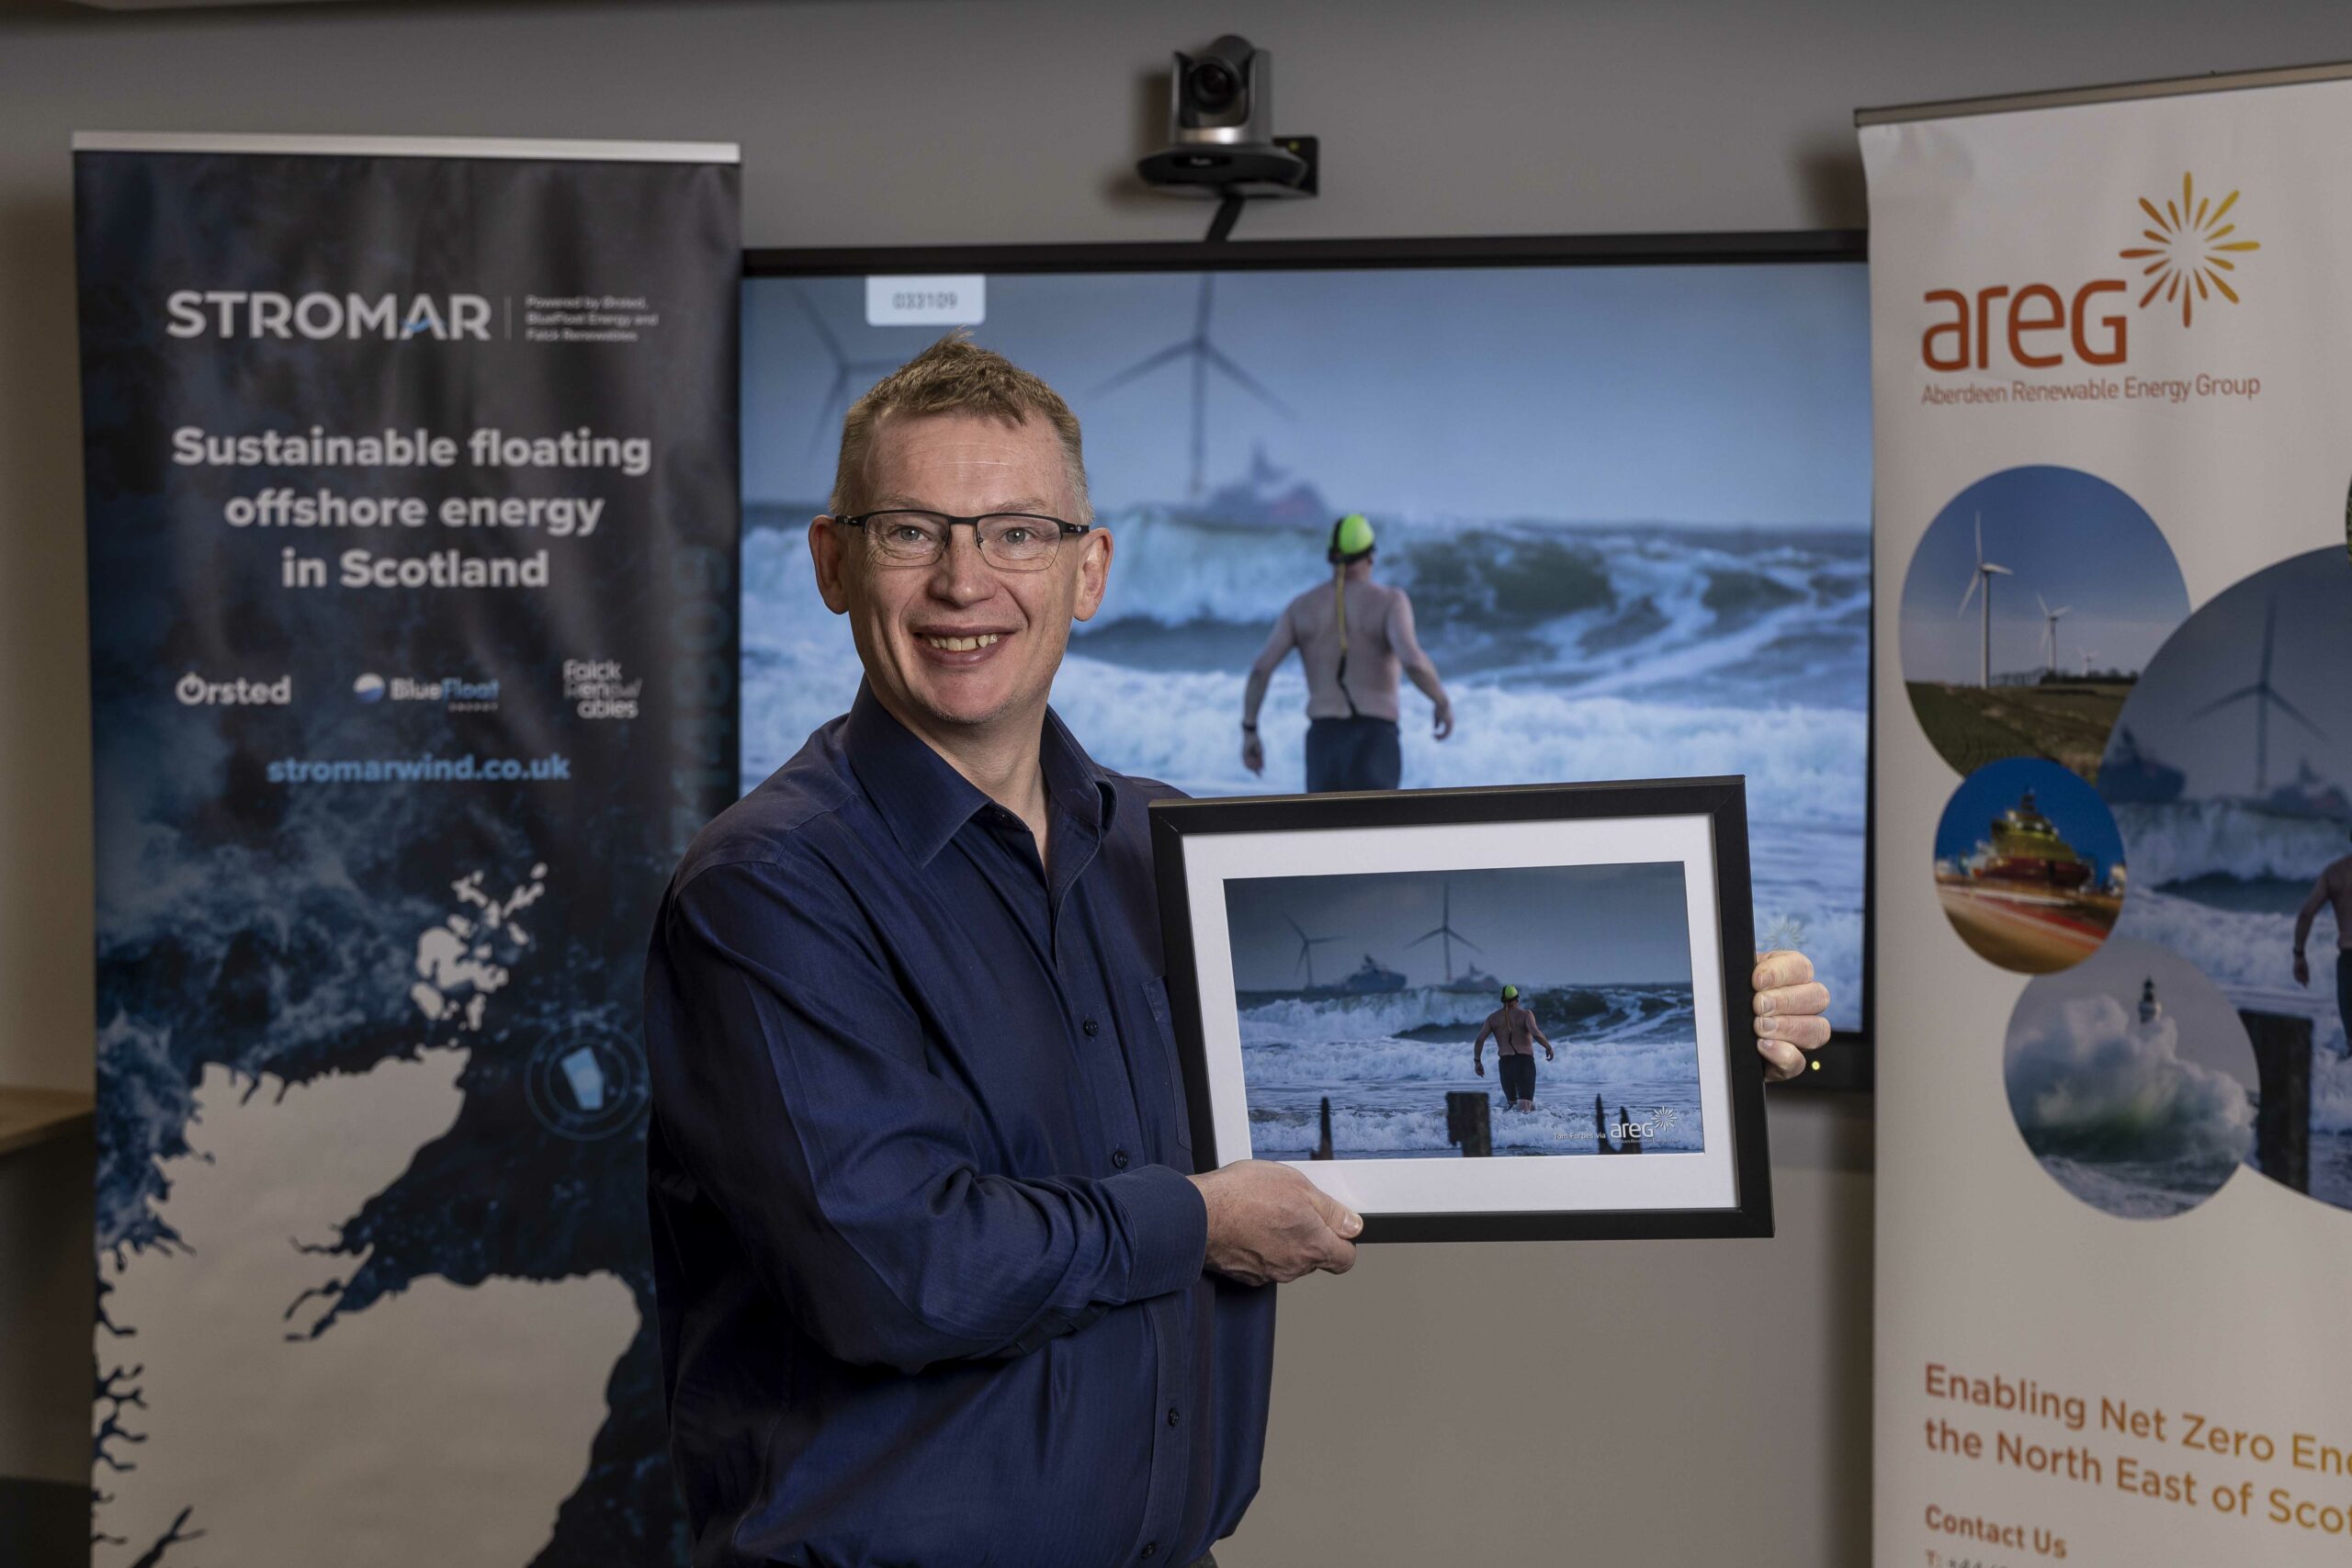 AREG NEWS: AREG photography competition winner highlights Aberdeen’s heritage and renewable energy future